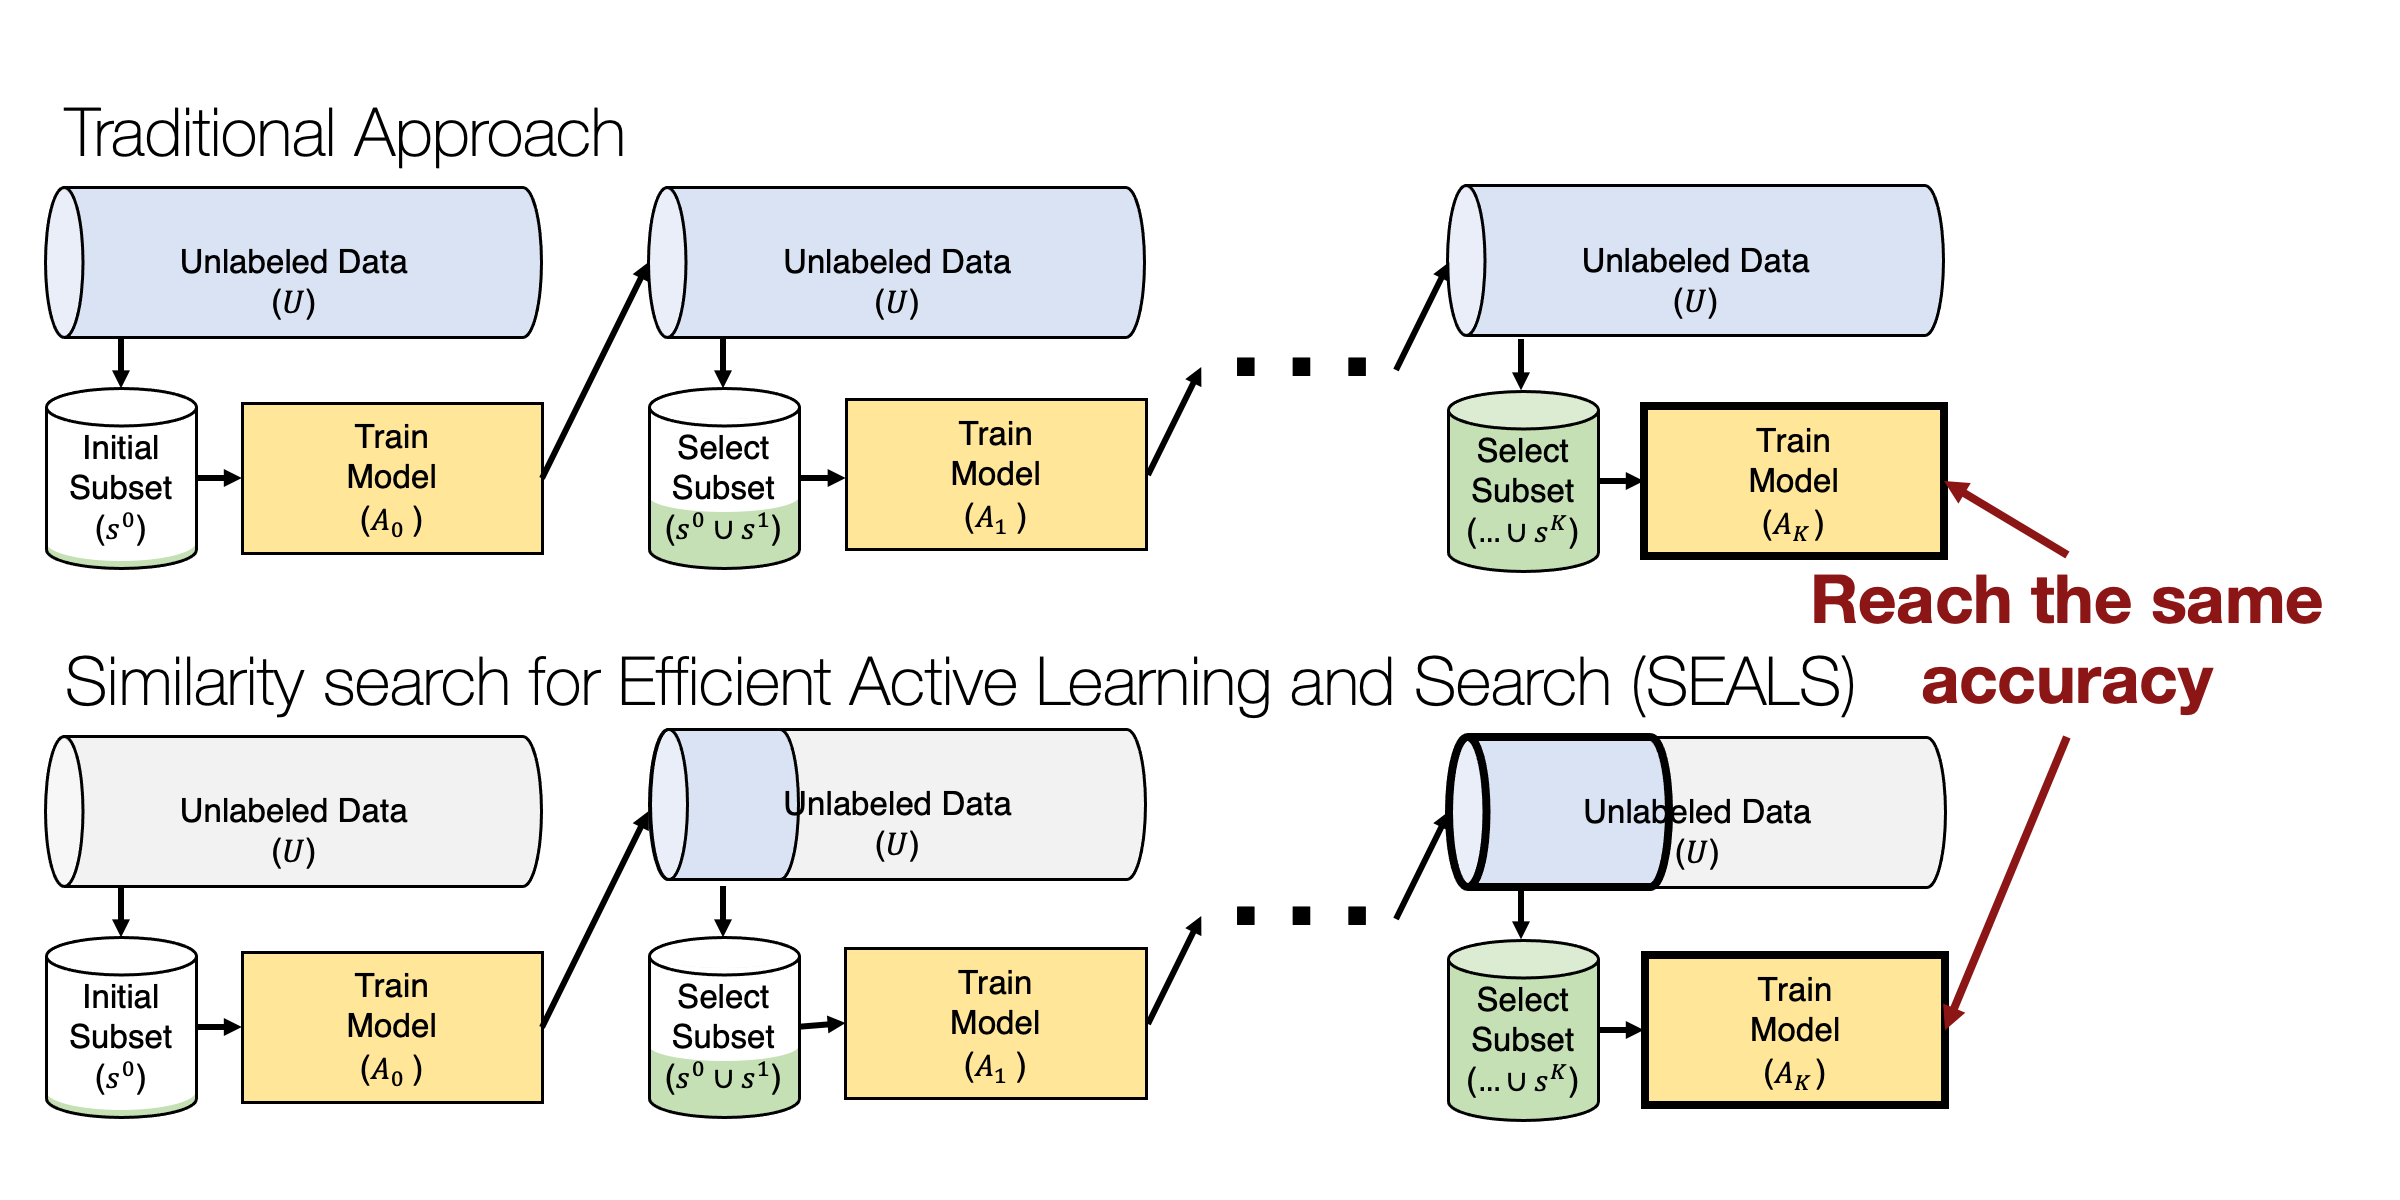 Comparison of tradition active learning approach vs Similarity Search for Efficient Active Learning and Search (SEALS)